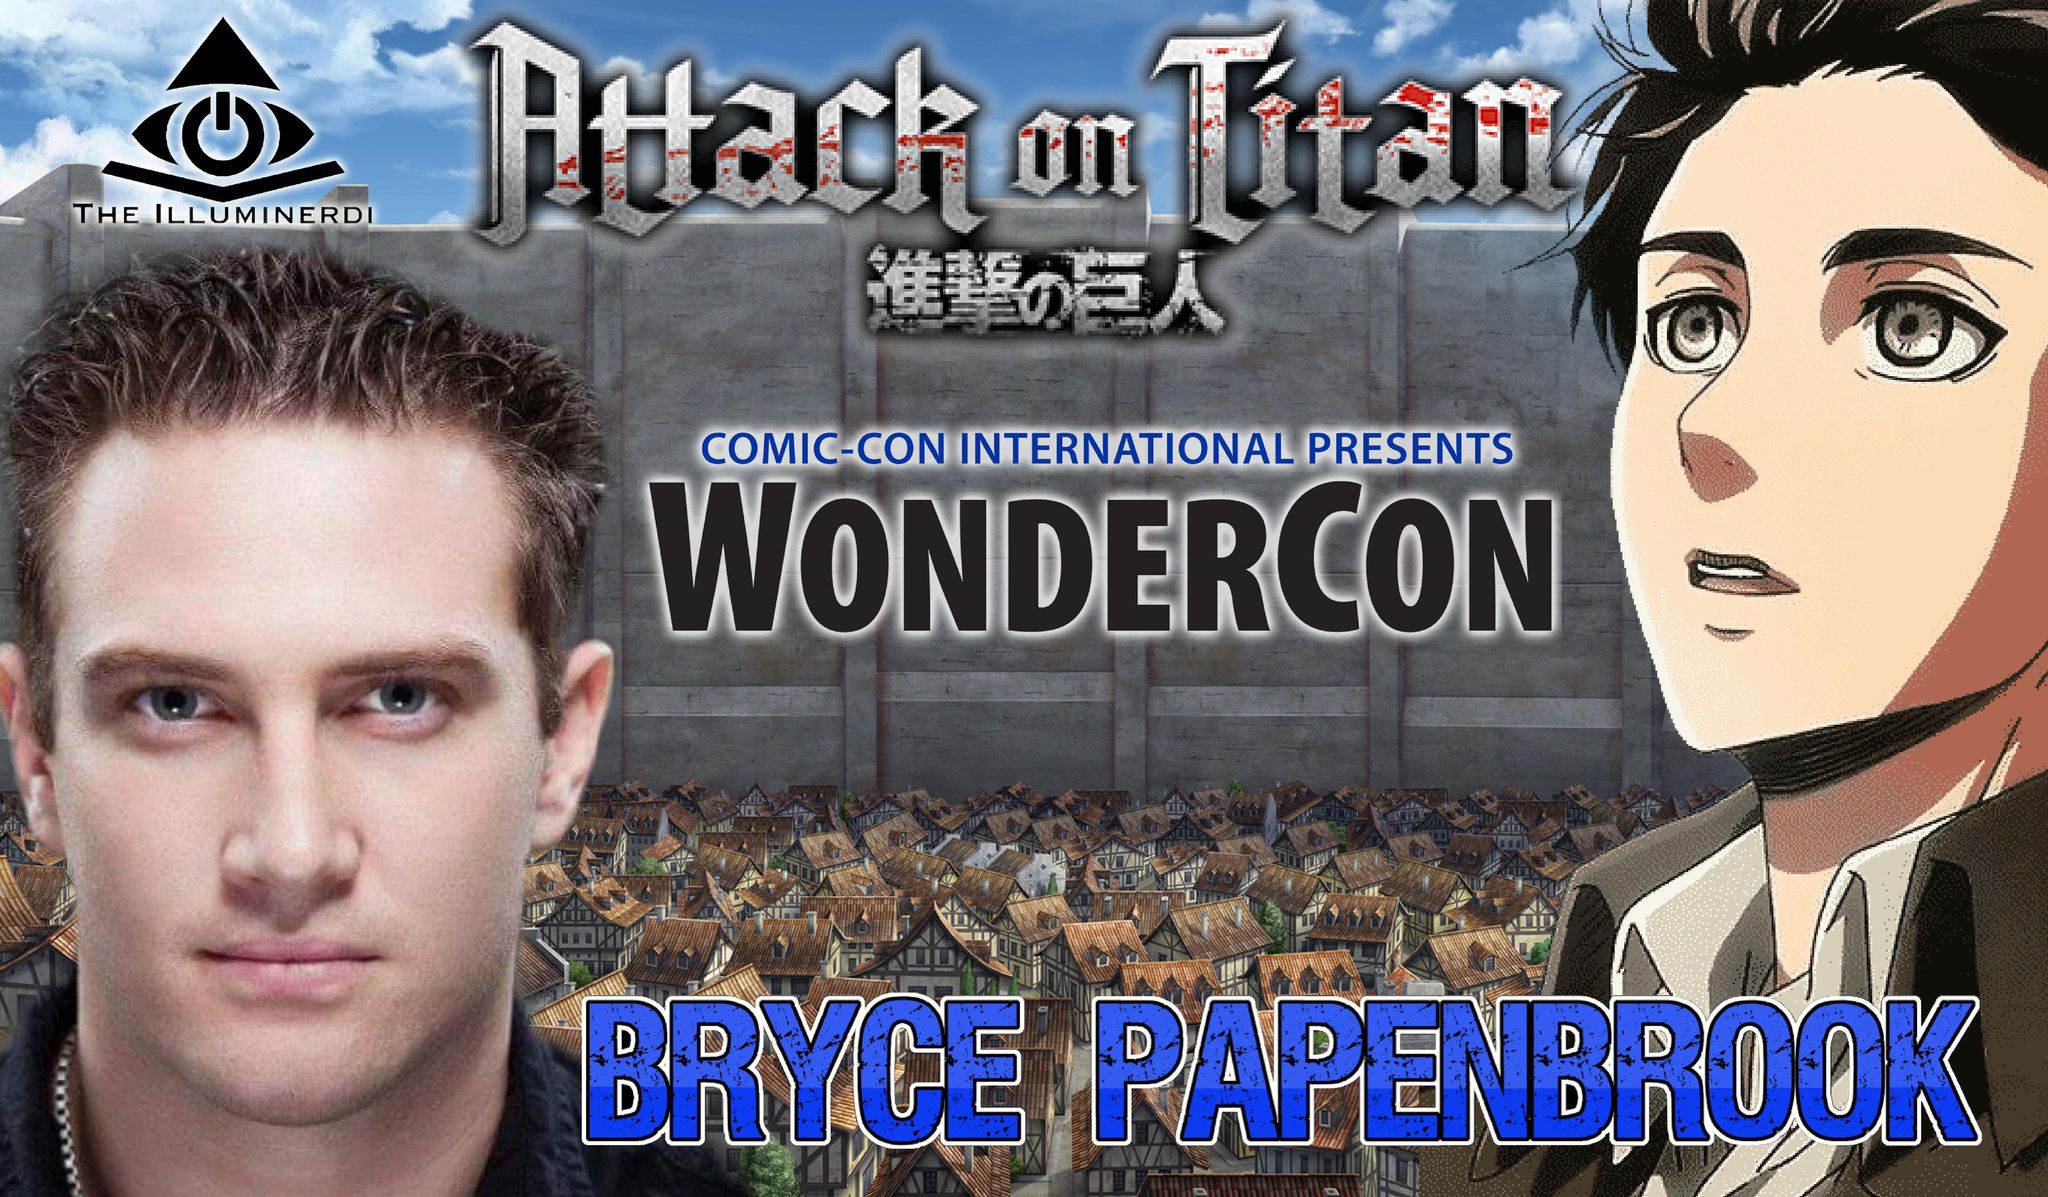 Attack On Titan Exclusive Interview: Bryce Papenbrook Shares His Journey And The Physical Demand of Voicing Eren Yaeger